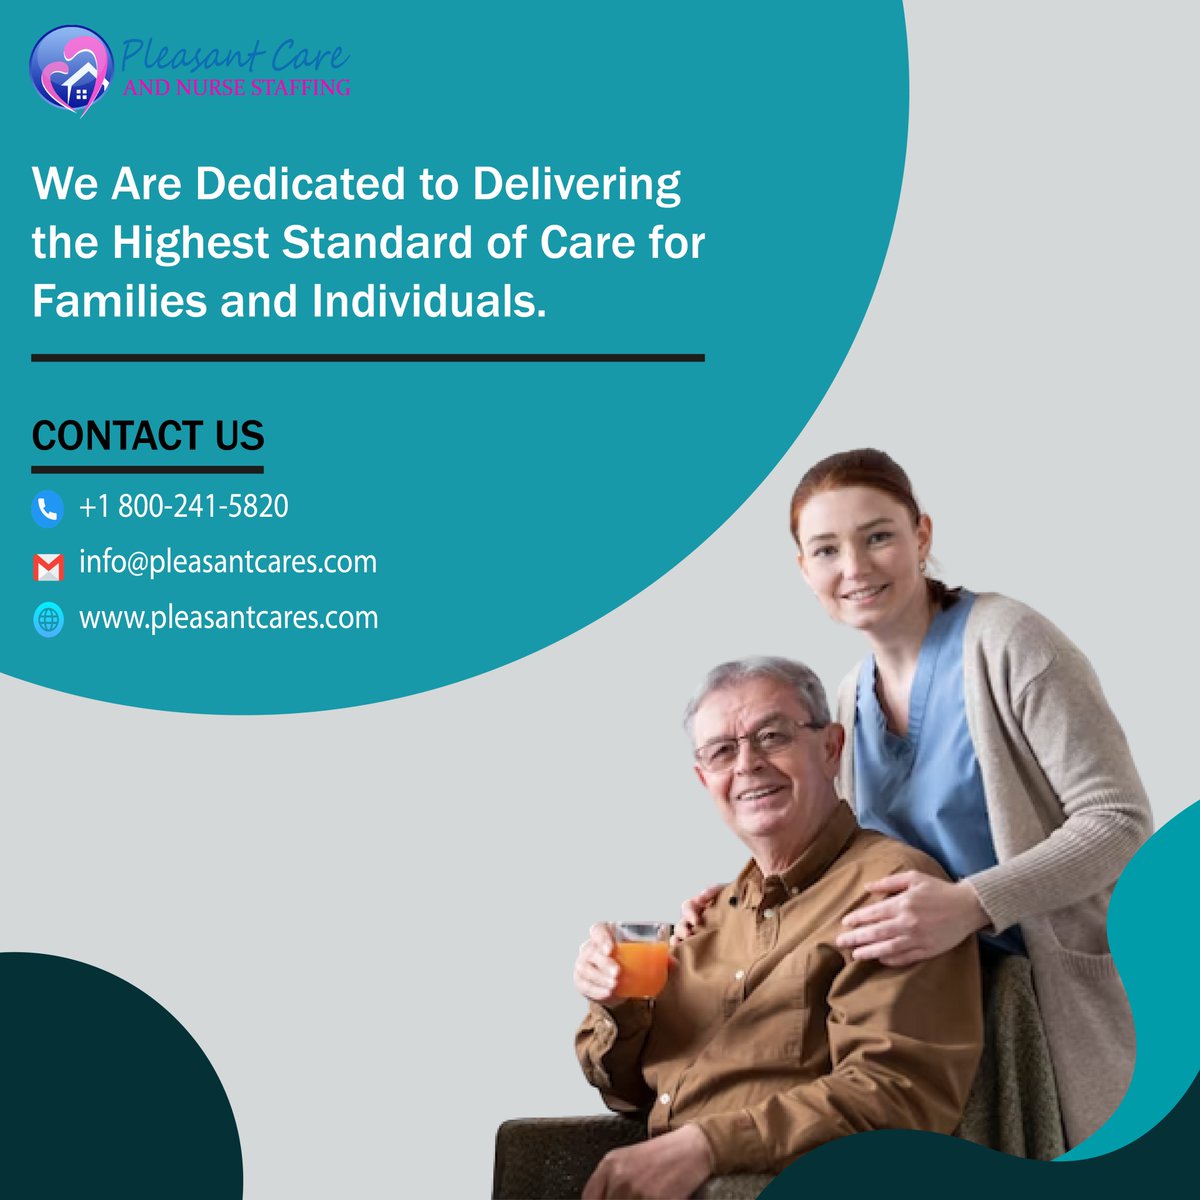 ''Expert doctor support tailored to your unique home-based wellness needs.''

Visit Our Website for More :
🌐pleasantcares.com

Call To Find Out More :
📞+1 800-241-5820

#triumphofficial #resilience #pleasantcare #elderlysupport #seniorhealthcare #homehealth